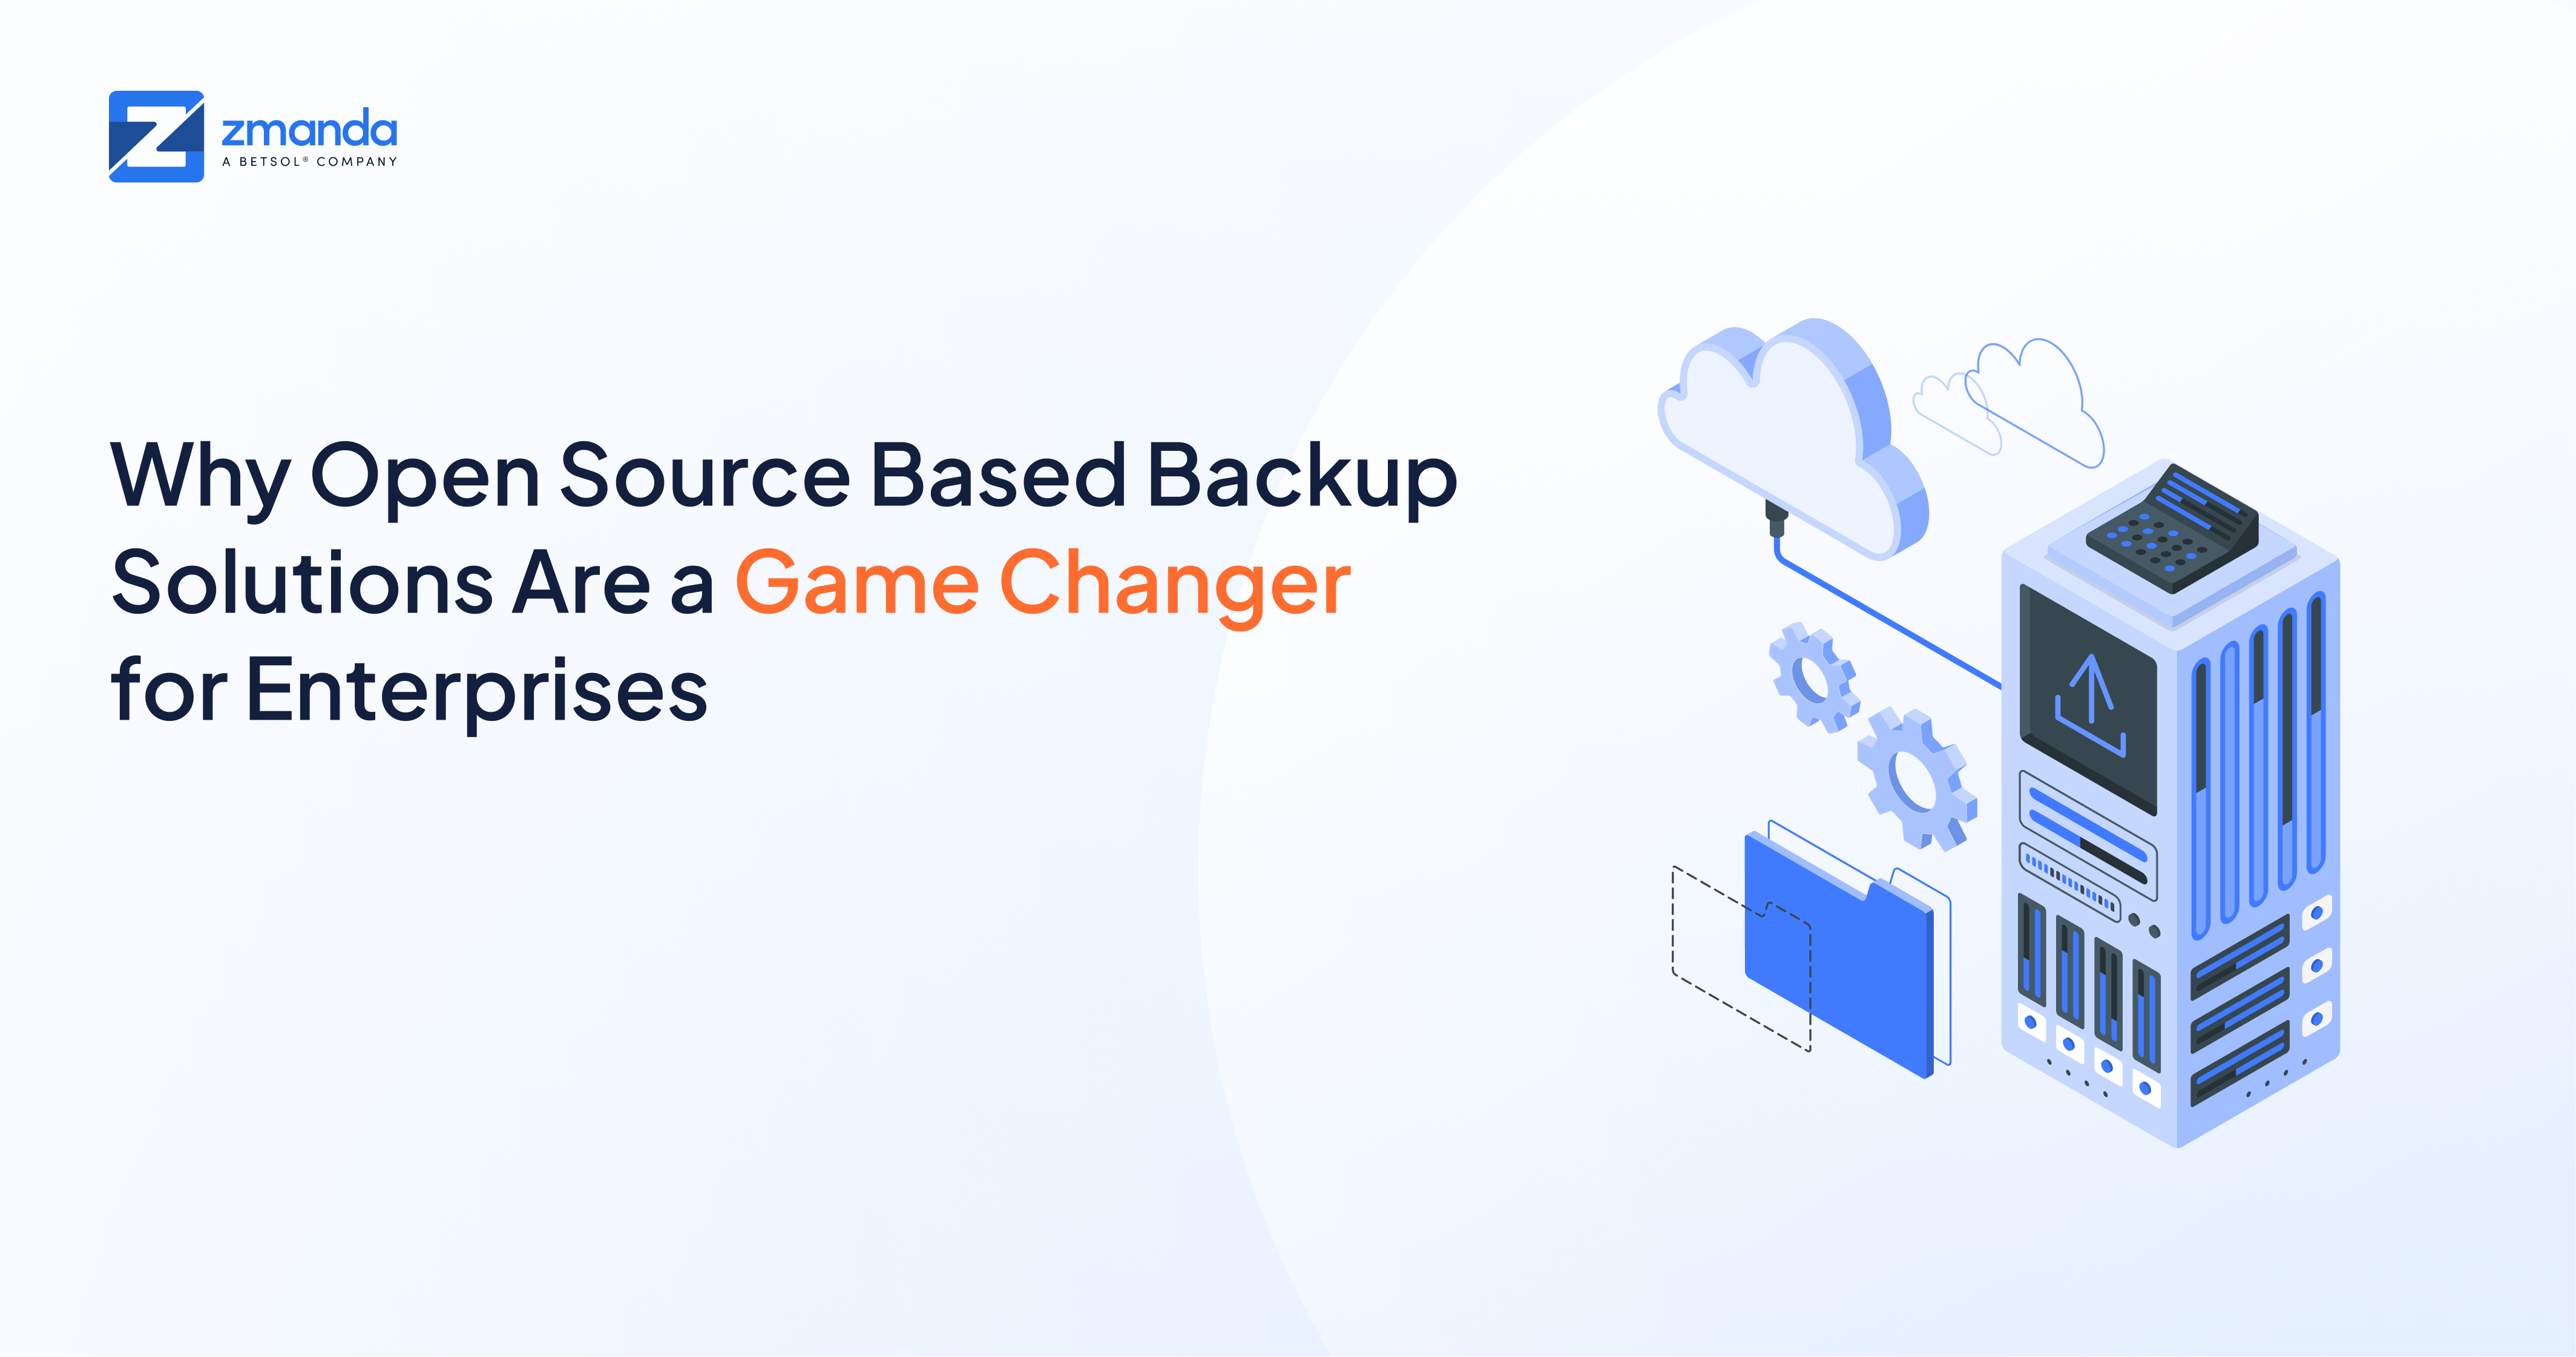 Why Open Source Based Backup Solutions Are a Game Changer for Enterprises